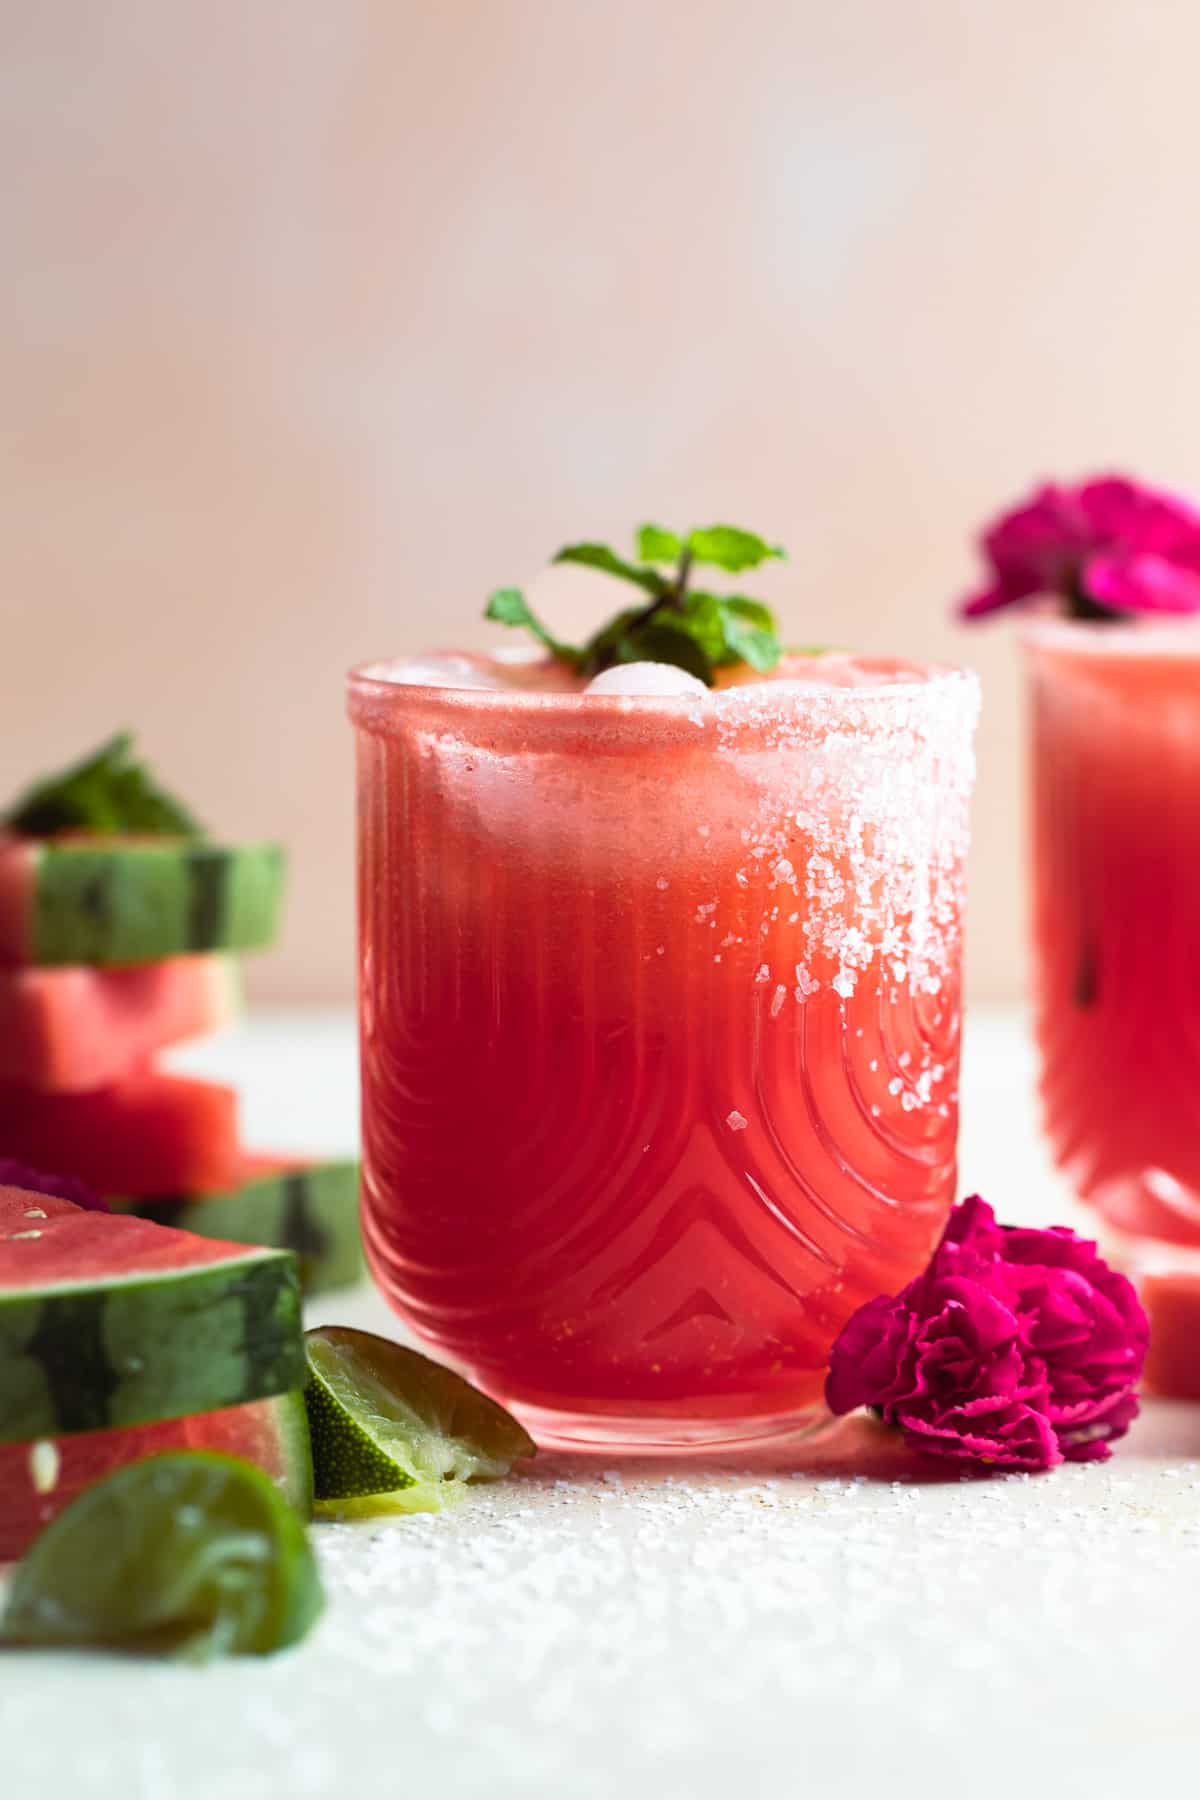 Glass filled with watermelon margarita and garnished with a sprig of mint.